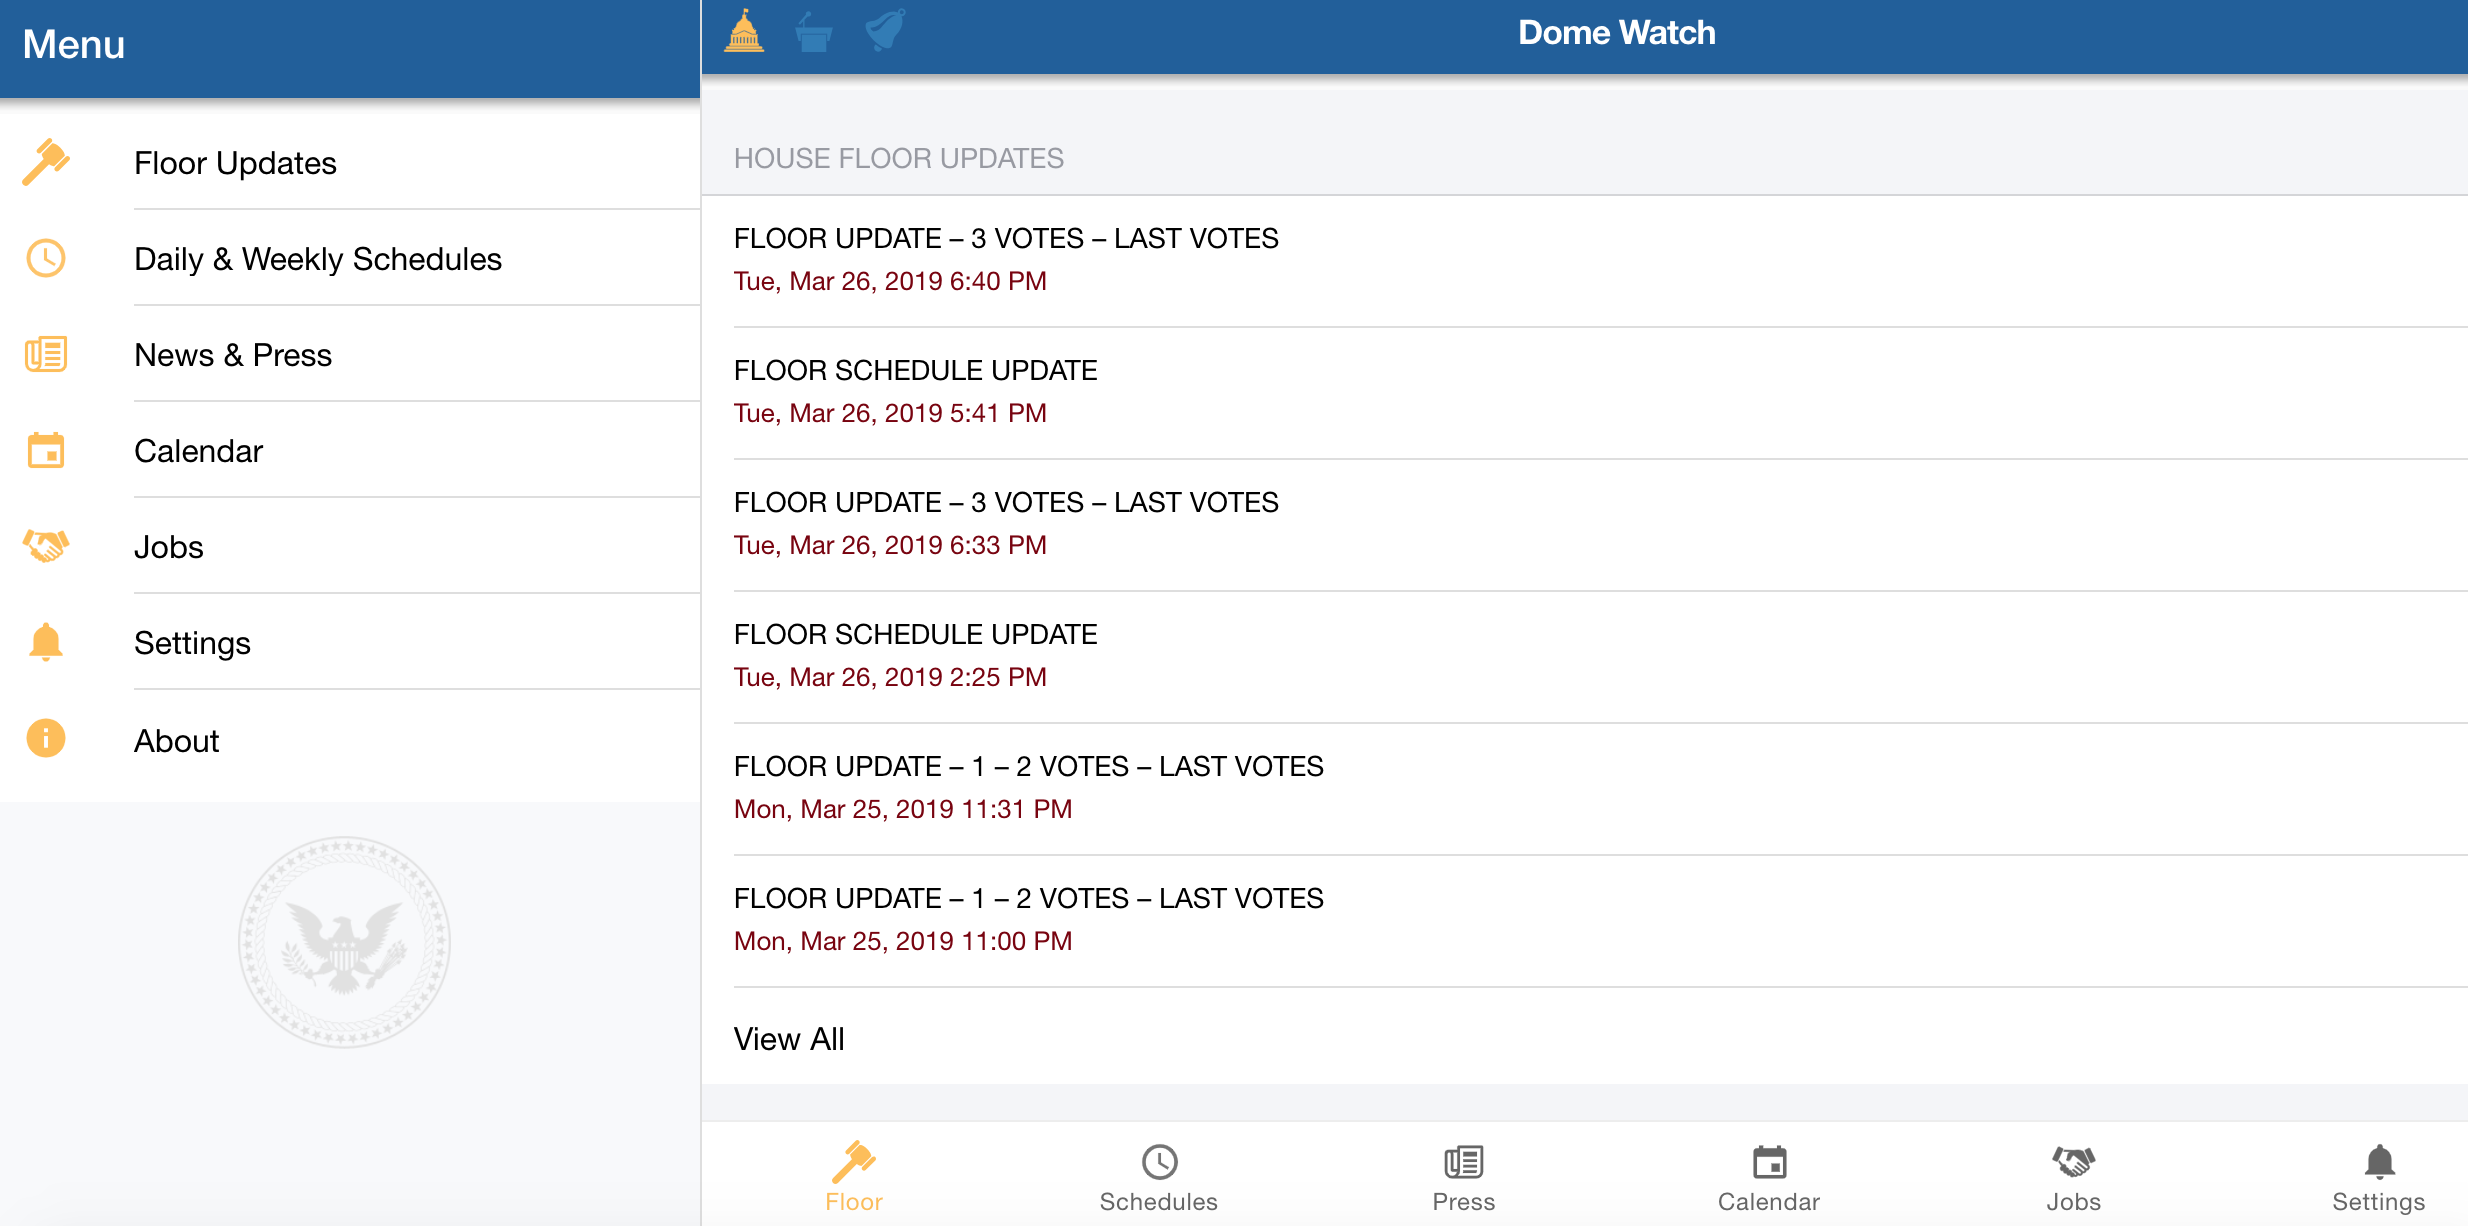 The newly relaunched Dome Watch app provides updates on House floor proceedings and more.